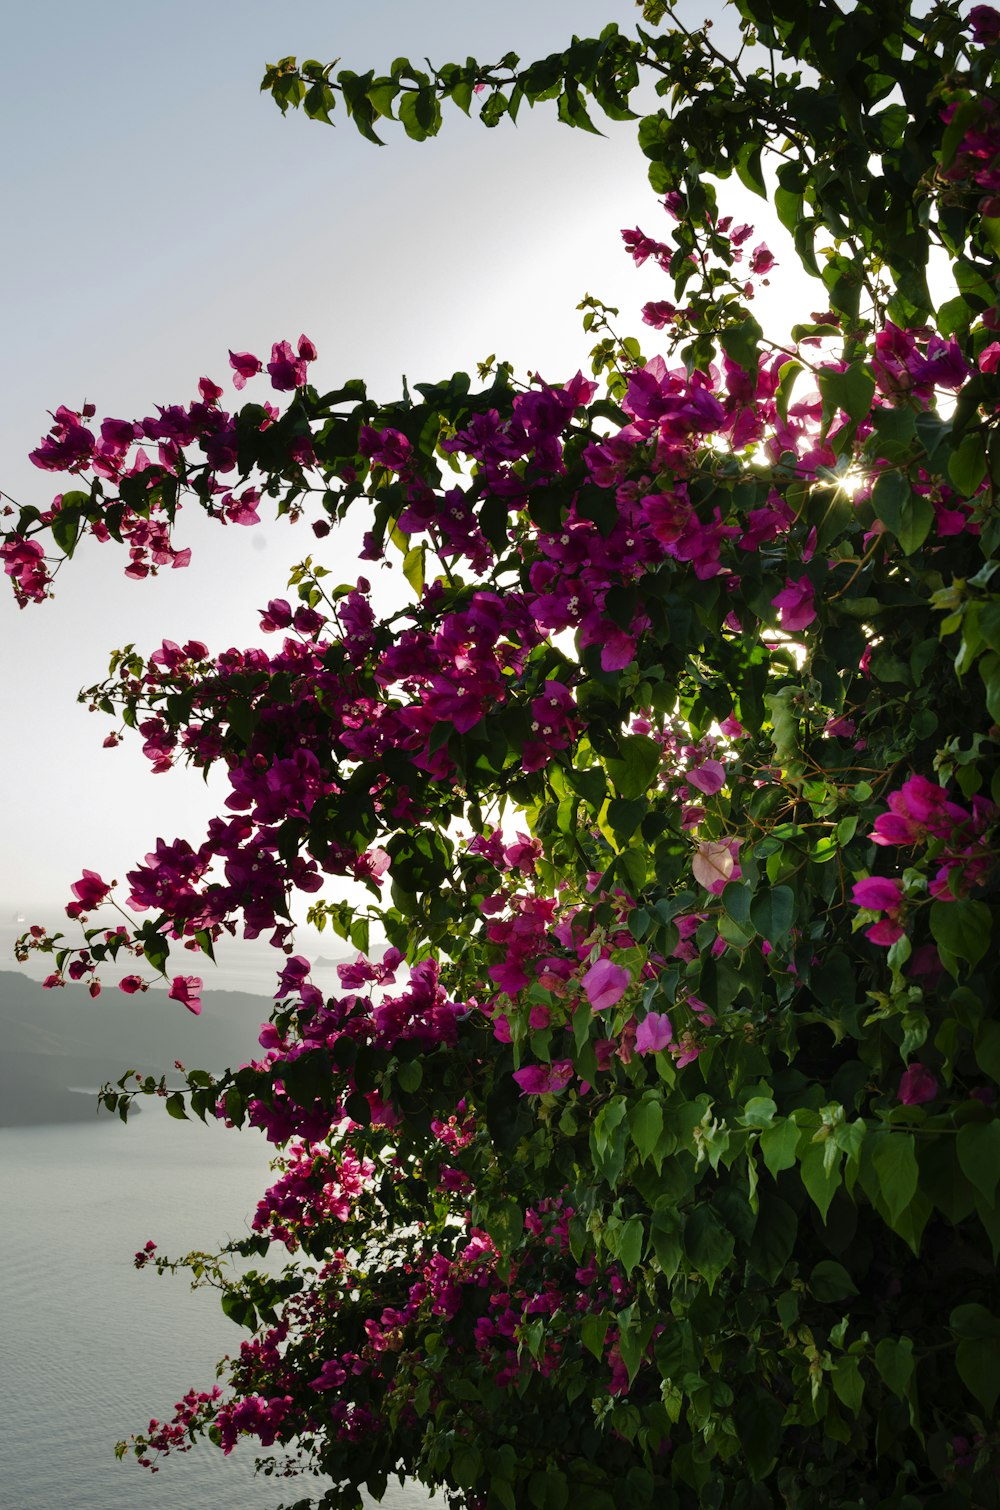 a view of a body of water through some flowers